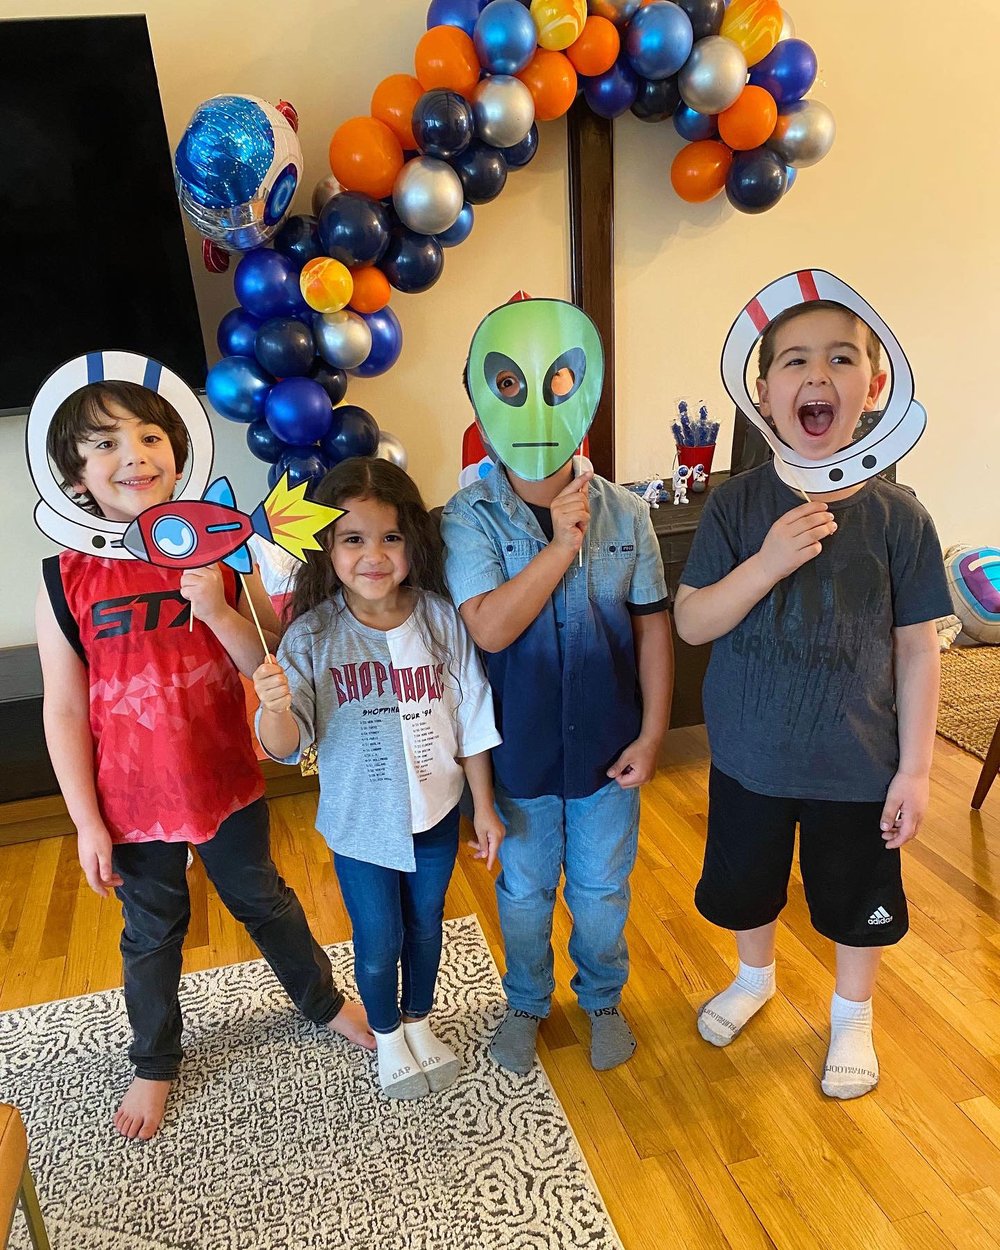 Space Party Ideas | outer space birthday party | space birthday party | space Photo Booth | out of this world birthday party | space party games | kids party games | kids birthday party ideas